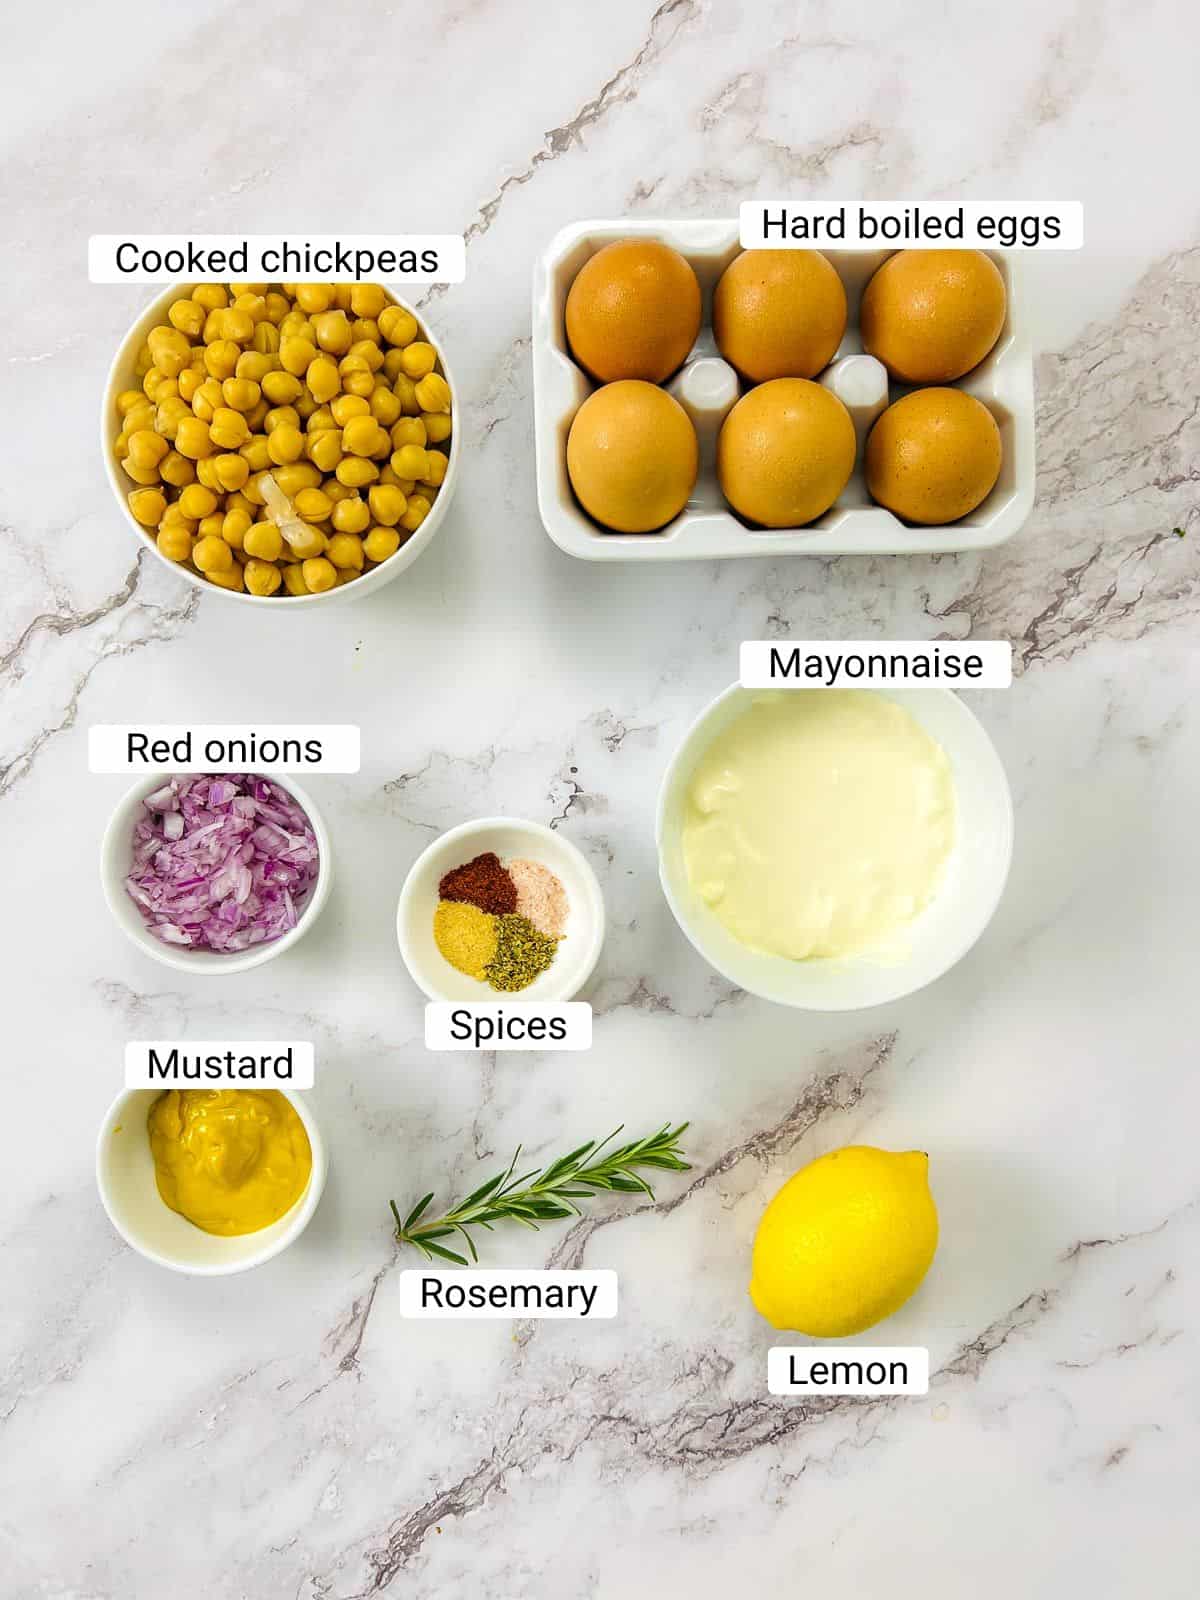 Ingredients to make deviled eggs with chickpeas on a white surface.